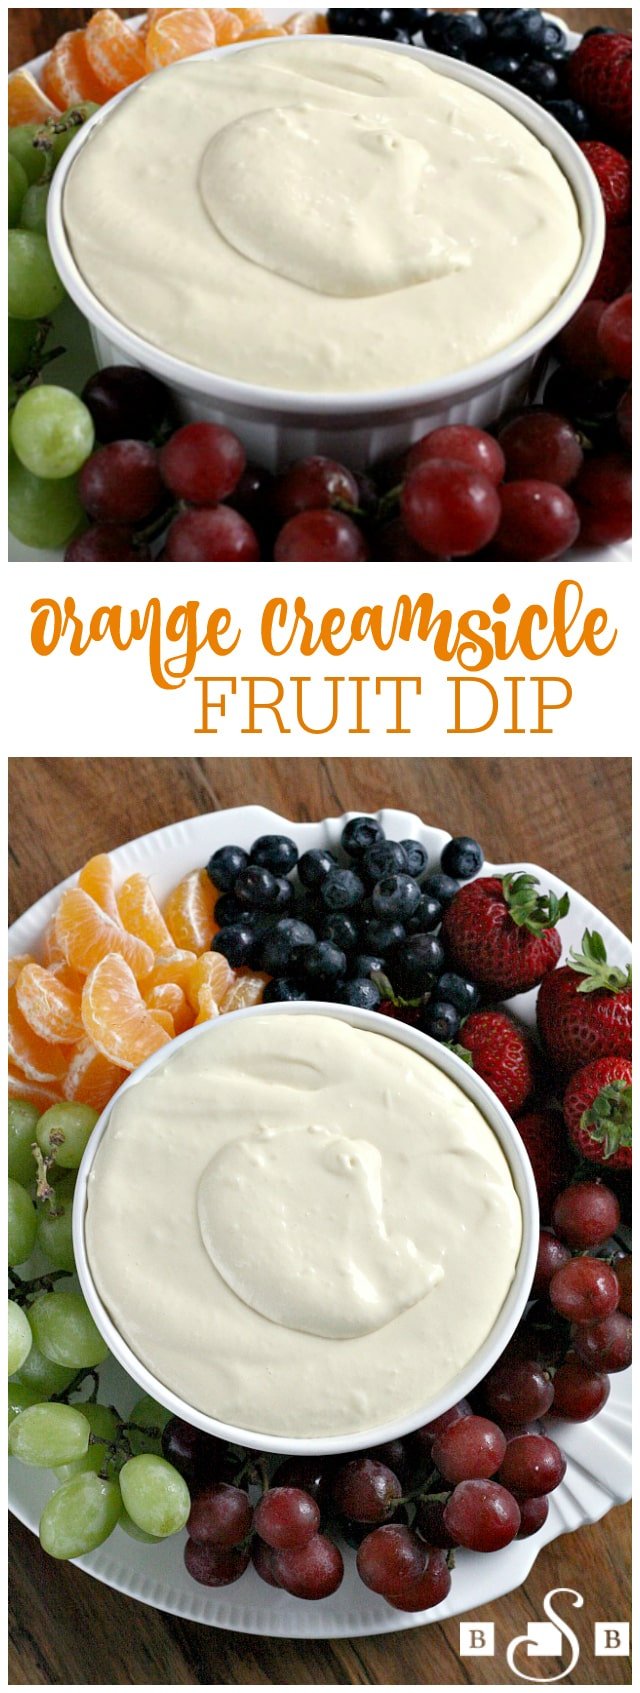 Orange Creamsicle Fruit Dip is simple and delicious with only three ingredients, and it tastes amazing with any variety of fresh fruit!